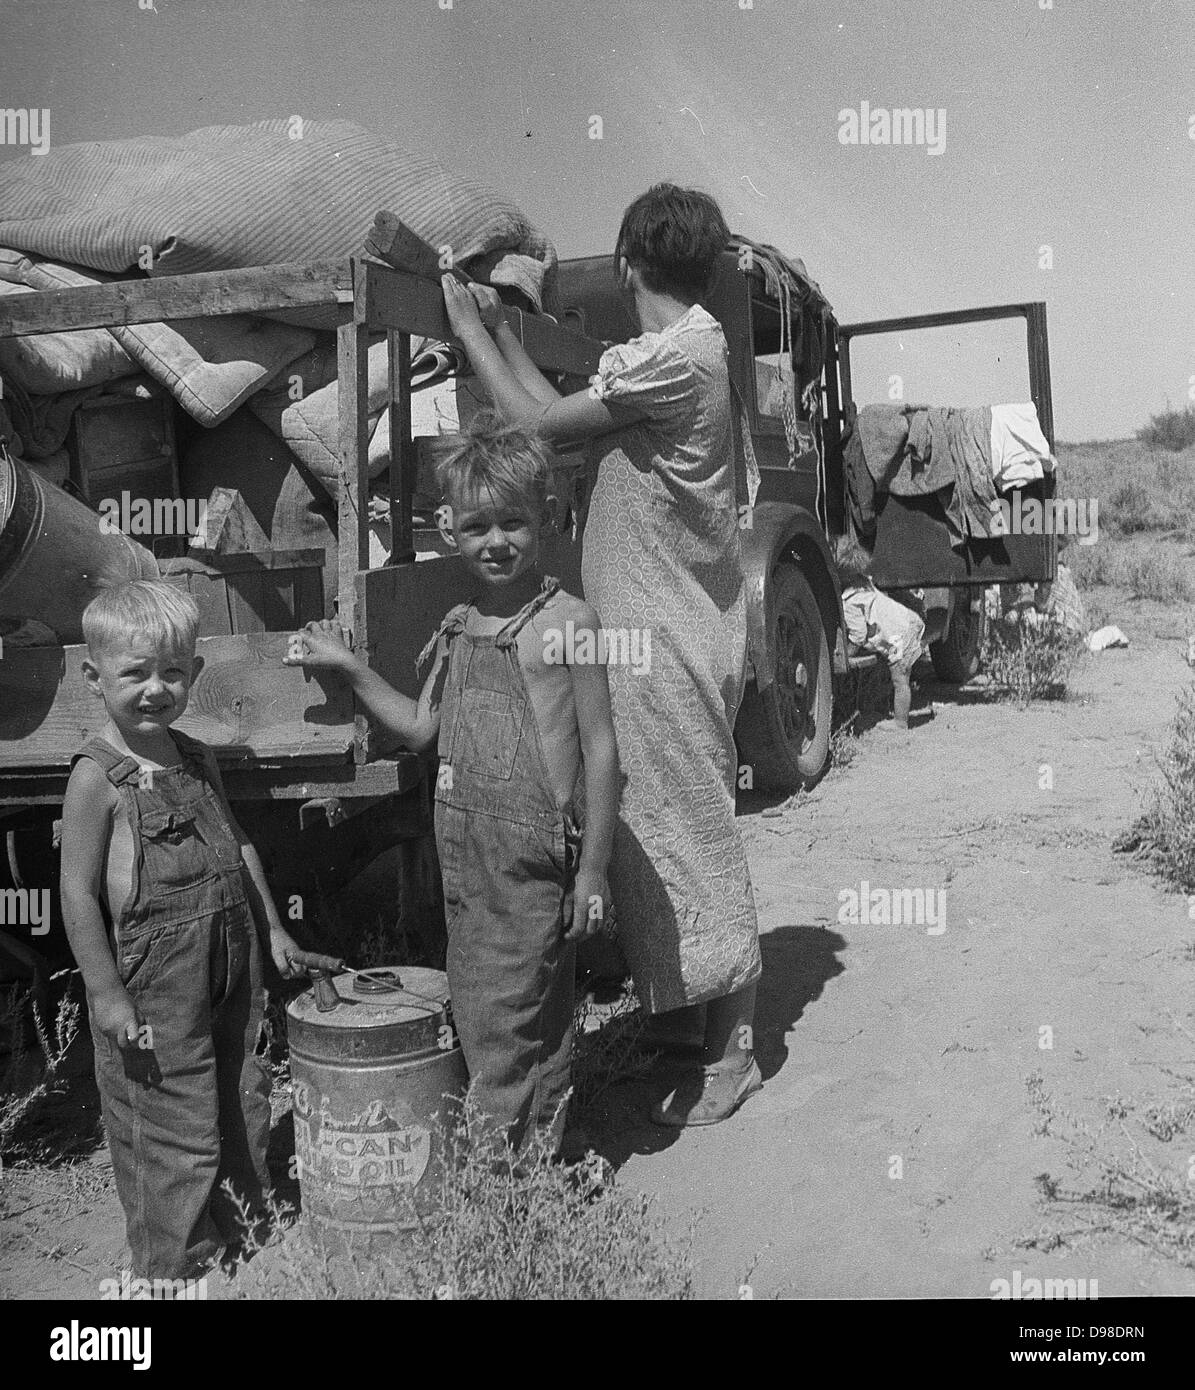 America in the Great Depression, 1936. Destitute family of nine, about to to sell their trailer and their belongings to raise cash to buy food. Stock Photo